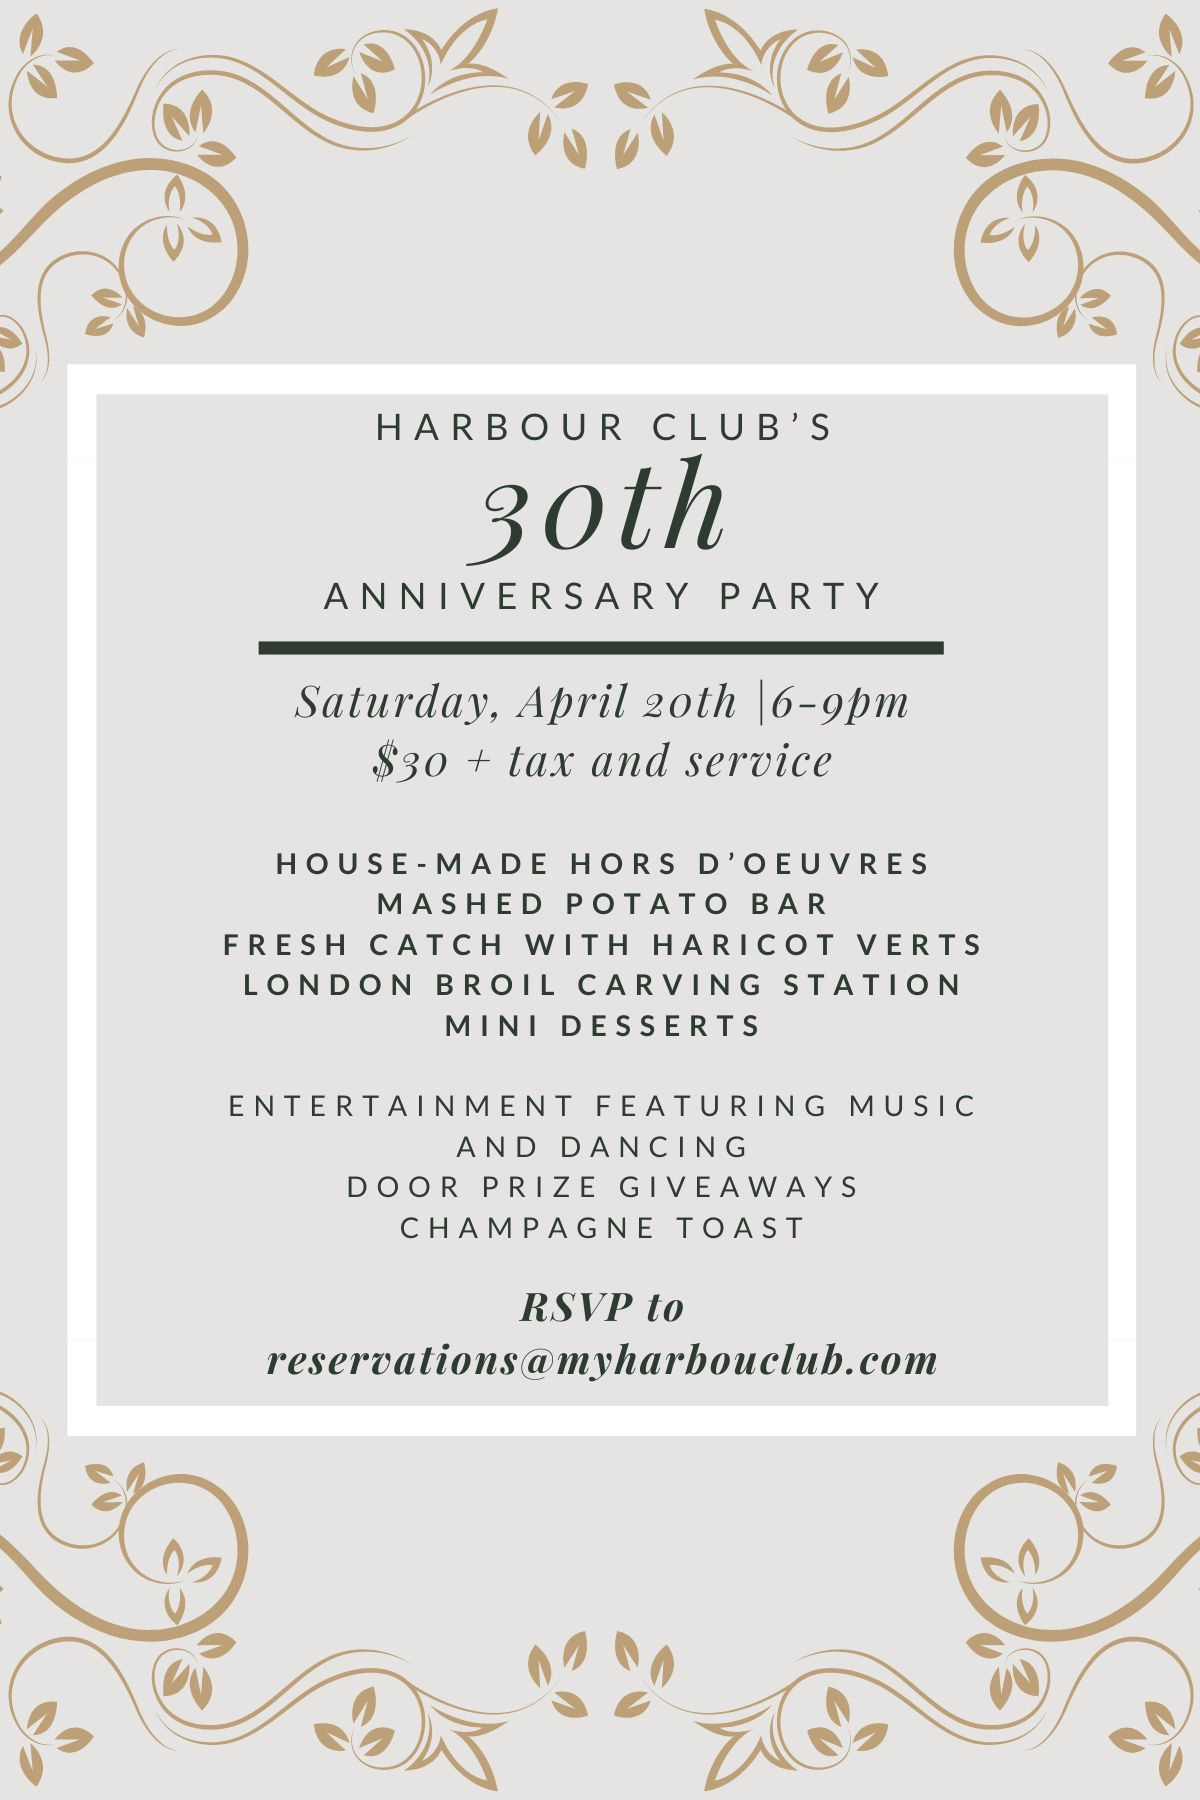 Harbour Club's 30th Anniversary Party